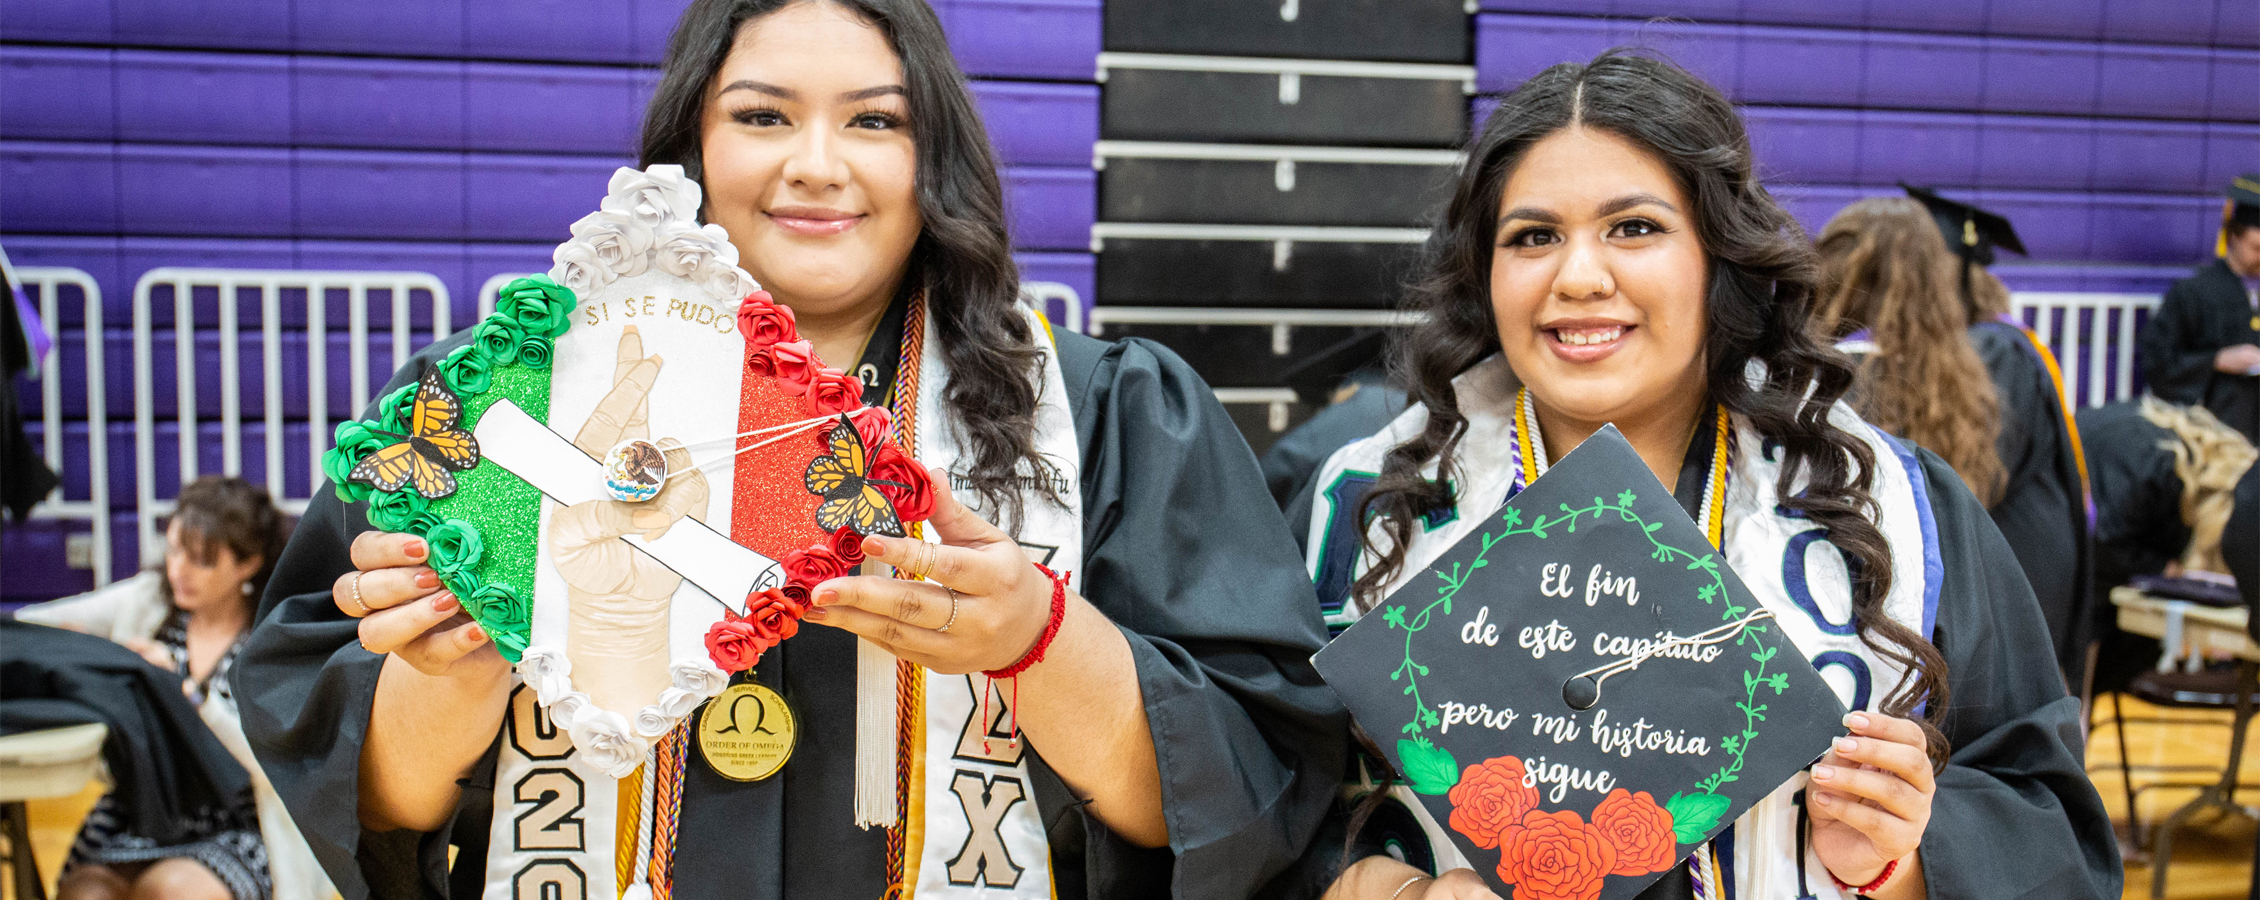 Two Spanish majors at graduation show their decorated caps.